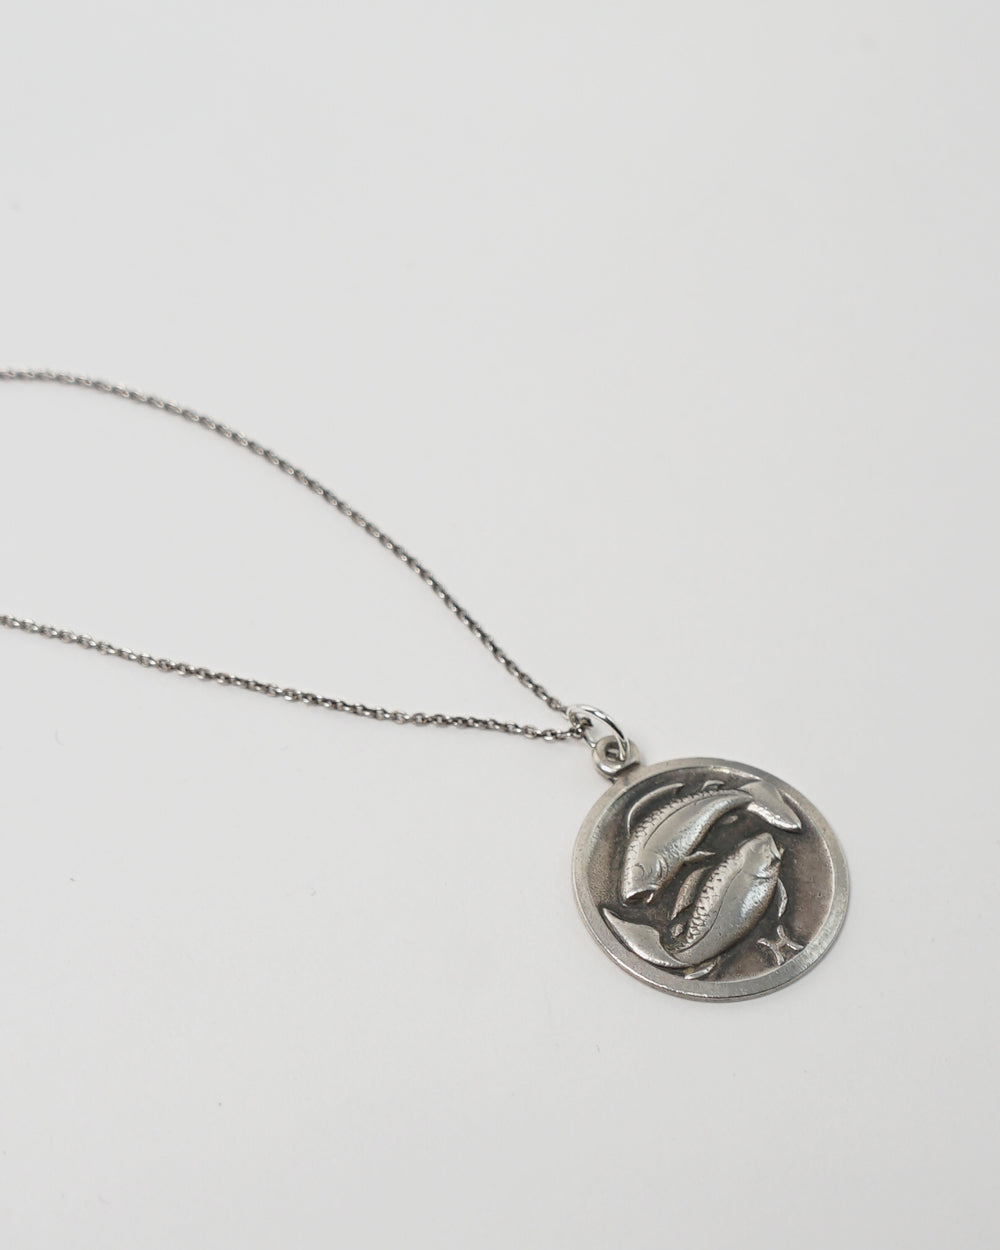 Silver Chain Necklace w/ Pisces Coin Charm